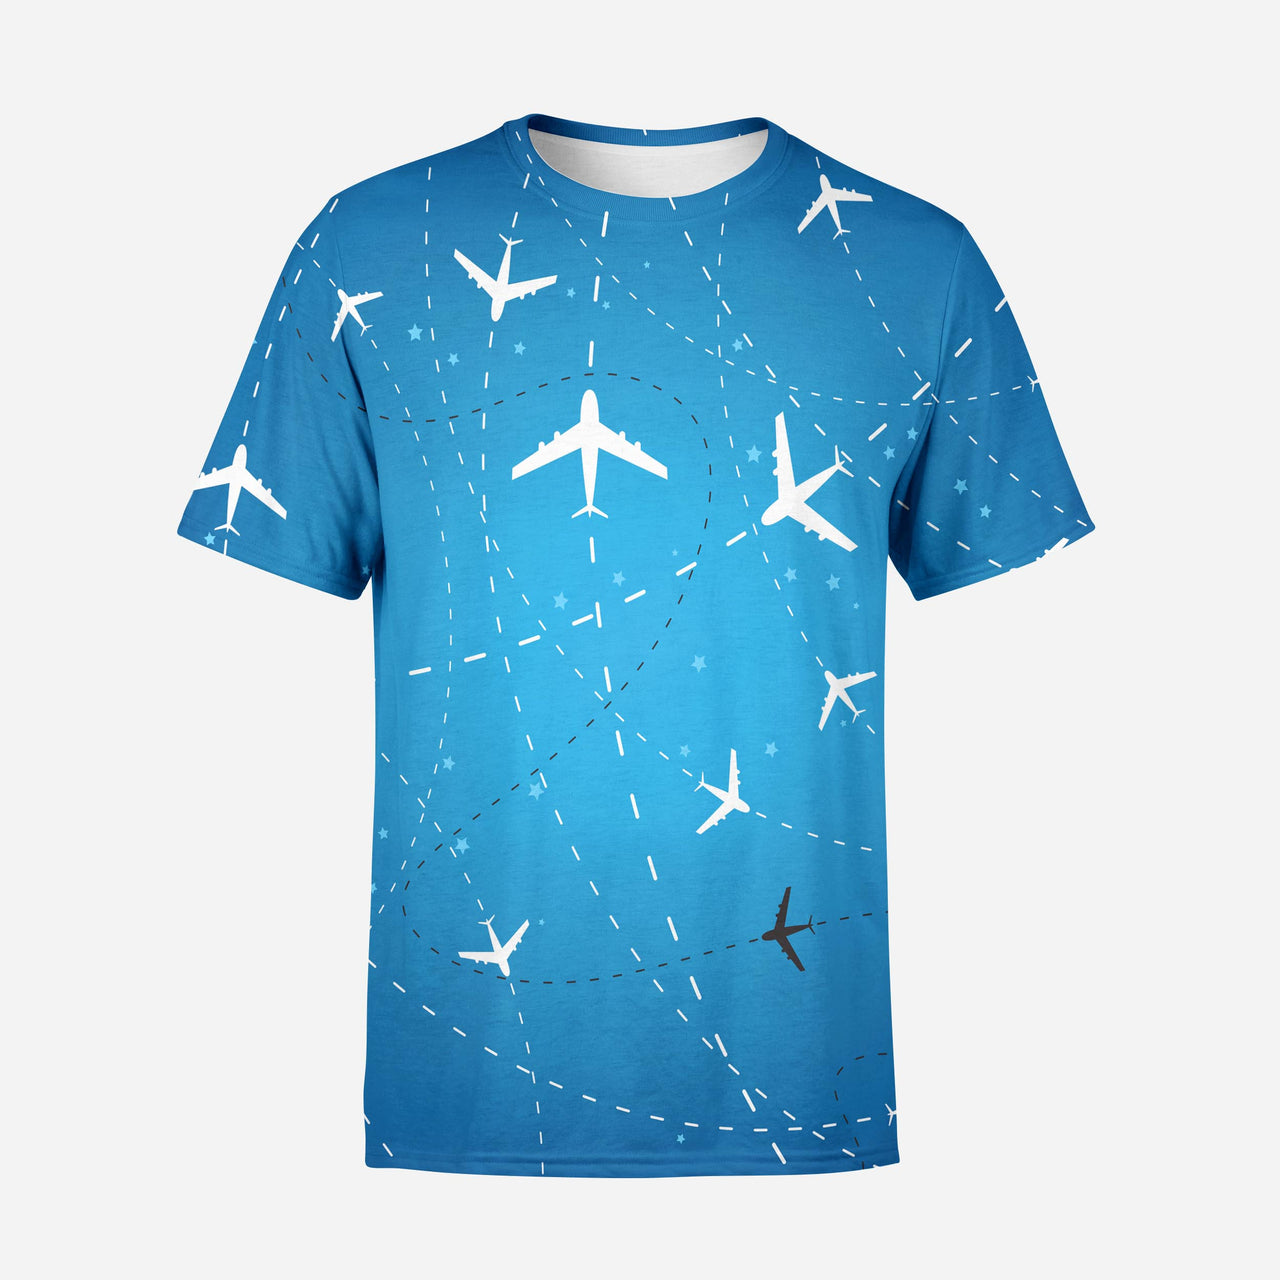 Travelling with Aircraft Printed 3D T-Shirts